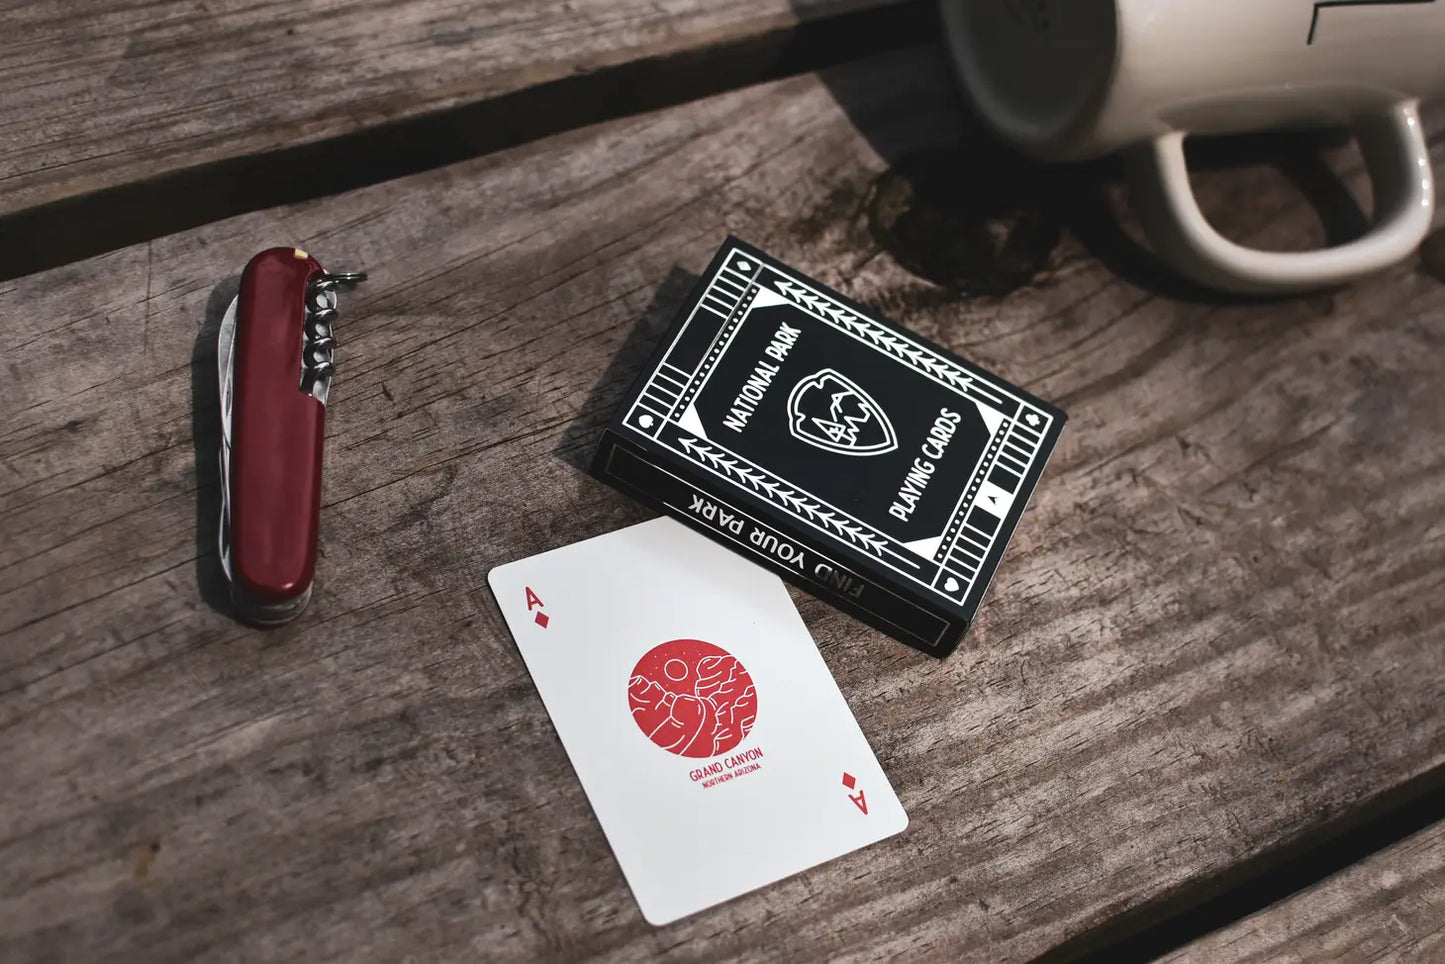 National Park Playing Cards - National Park Playing Cards